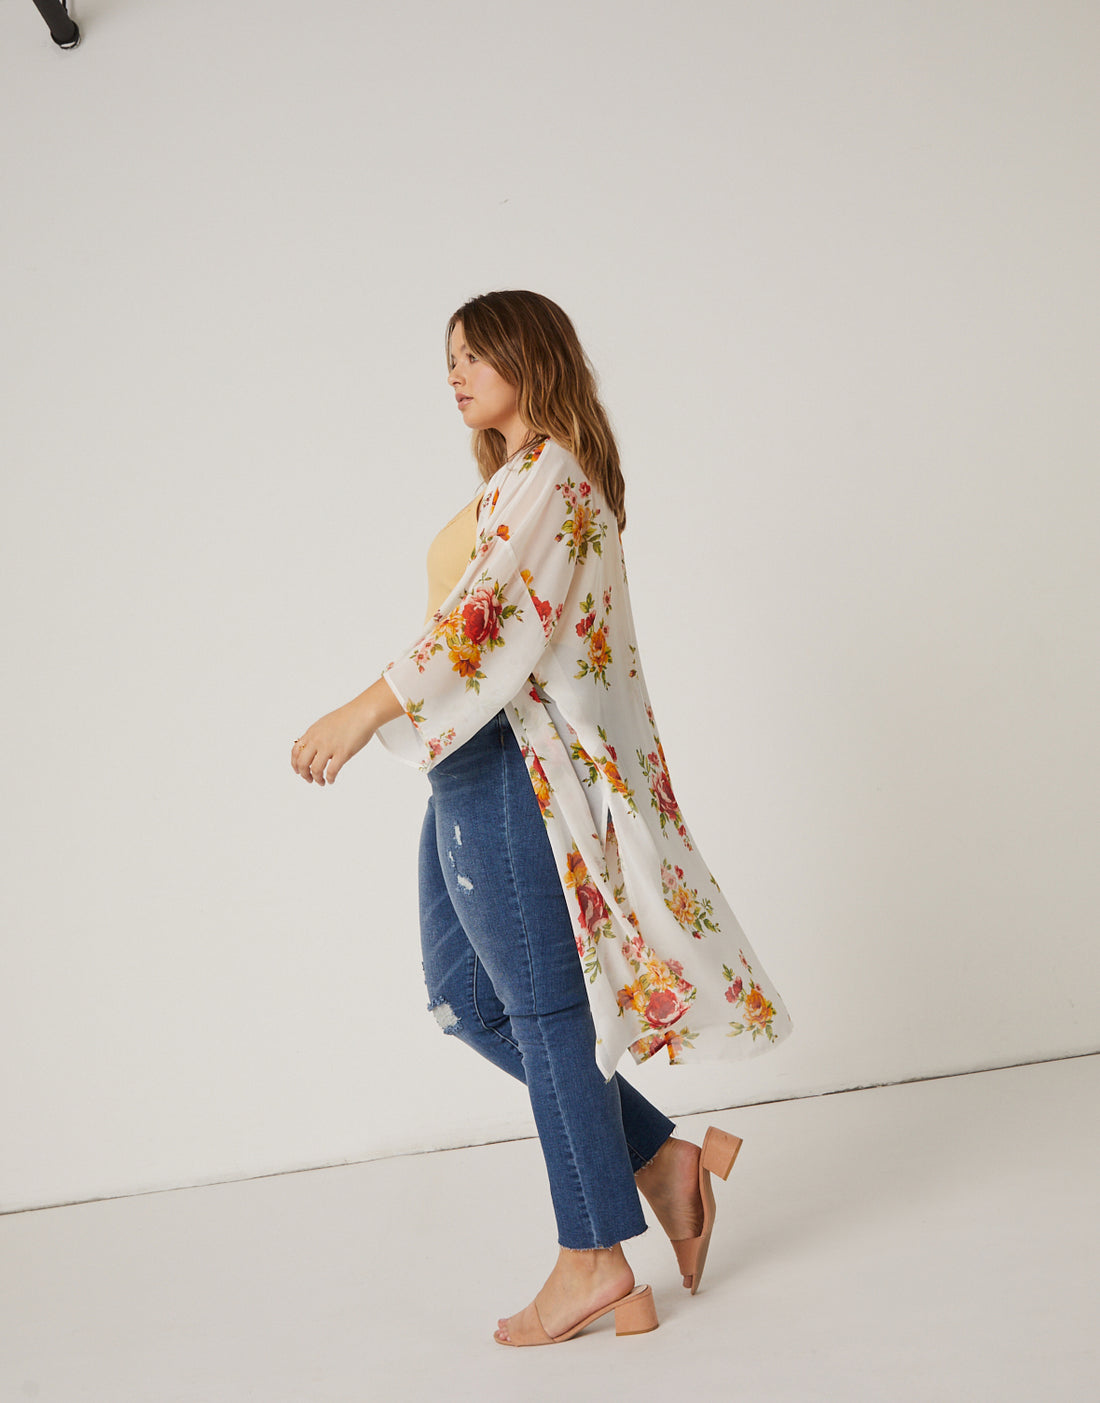 Curve Floral Printed Mesh Cardigan Plus Size Outerwear -2020AVE